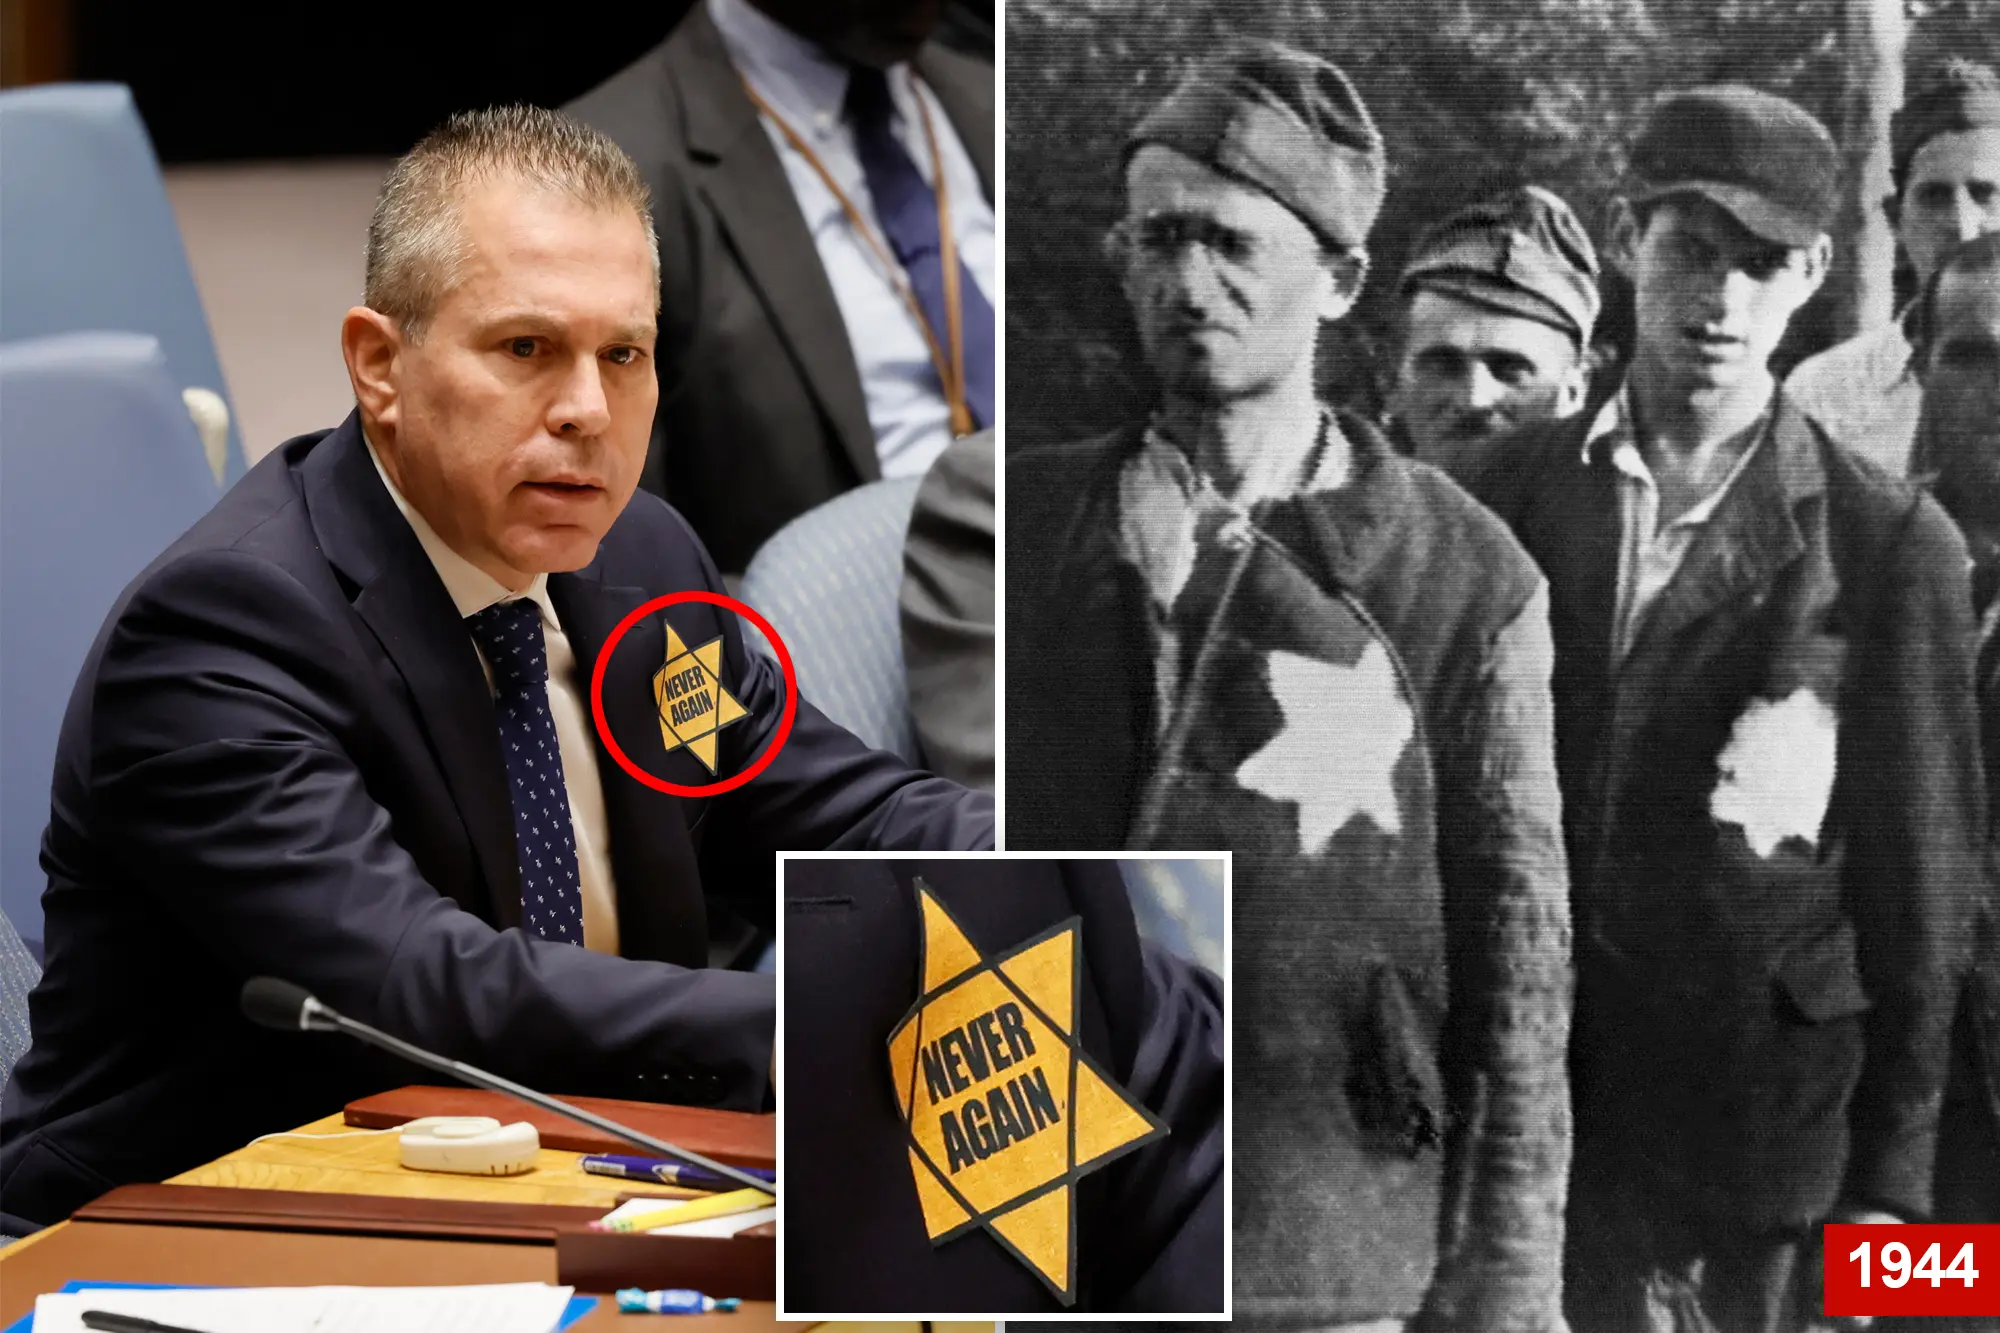 Photo composition Israel's ambassador to the UN, Gilad Erdan, wears the Star of David (left) and Jews are seen wearing clothing after being liberated from Nazi German camps (right). Photo: Yves Engler/File photo.